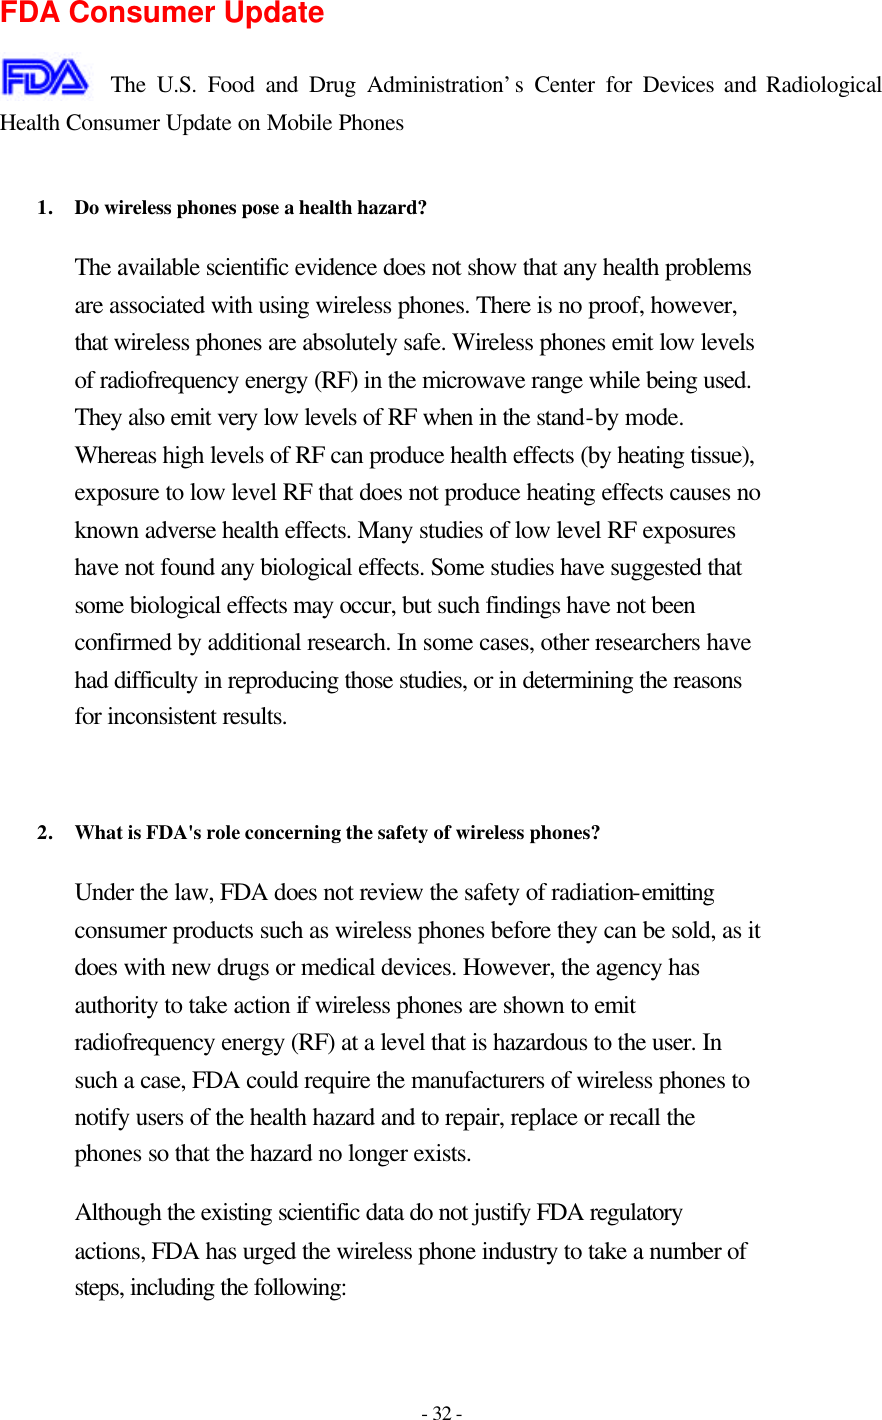 - 32 -  FDA Consumer Update  The U.S. Food and Drug Administration’s Center for Devices and Radiological Health Consumer Update on Mobile Phones  1. Do wireless phones pose a health hazard?  The available scientific evidence does not show that any health problems are associated with using wireless phones. There is no proof, however, that wireless phones are absolutely safe. Wireless phones emit low levels of radiofrequency energy (RF) in the microwave range while being used. They also emit very low levels of RF when in the stand-by mode. Whereas high levels of RF can produce health effects (by heating tissue), exposure to low level RF that does not produce heating effects causes no known adverse health effects. Many studies of low level RF exposures have not found any biological effects. Some studies have suggested that some biological effects may occur, but such findings have not been confirmed by additional research. In some cases, other researchers have had difficulty in reproducing those studies, or in determining the reasons for inconsistent results.   2. What is FDA&apos;s role concerning the safety of wireless phones?  Under the law, FDA does not review the safety of radiation-emitting consumer products such as wireless phones before they can be sold, as it does with new drugs or medical devices. However, the agency has authority to take action if wireless phones are shown to emit radiofrequency energy (RF) at a level that is hazardous to the user. In such a case, FDA could require the manufacturers of wireless phones to notify users of the health hazard and to repair, replace or recall the phones so that the hazard no longer exists. Although the existing scientific data do not justify FDA regulatory actions, FDA has urged the wireless phone industry to take a number of steps, including the following: 